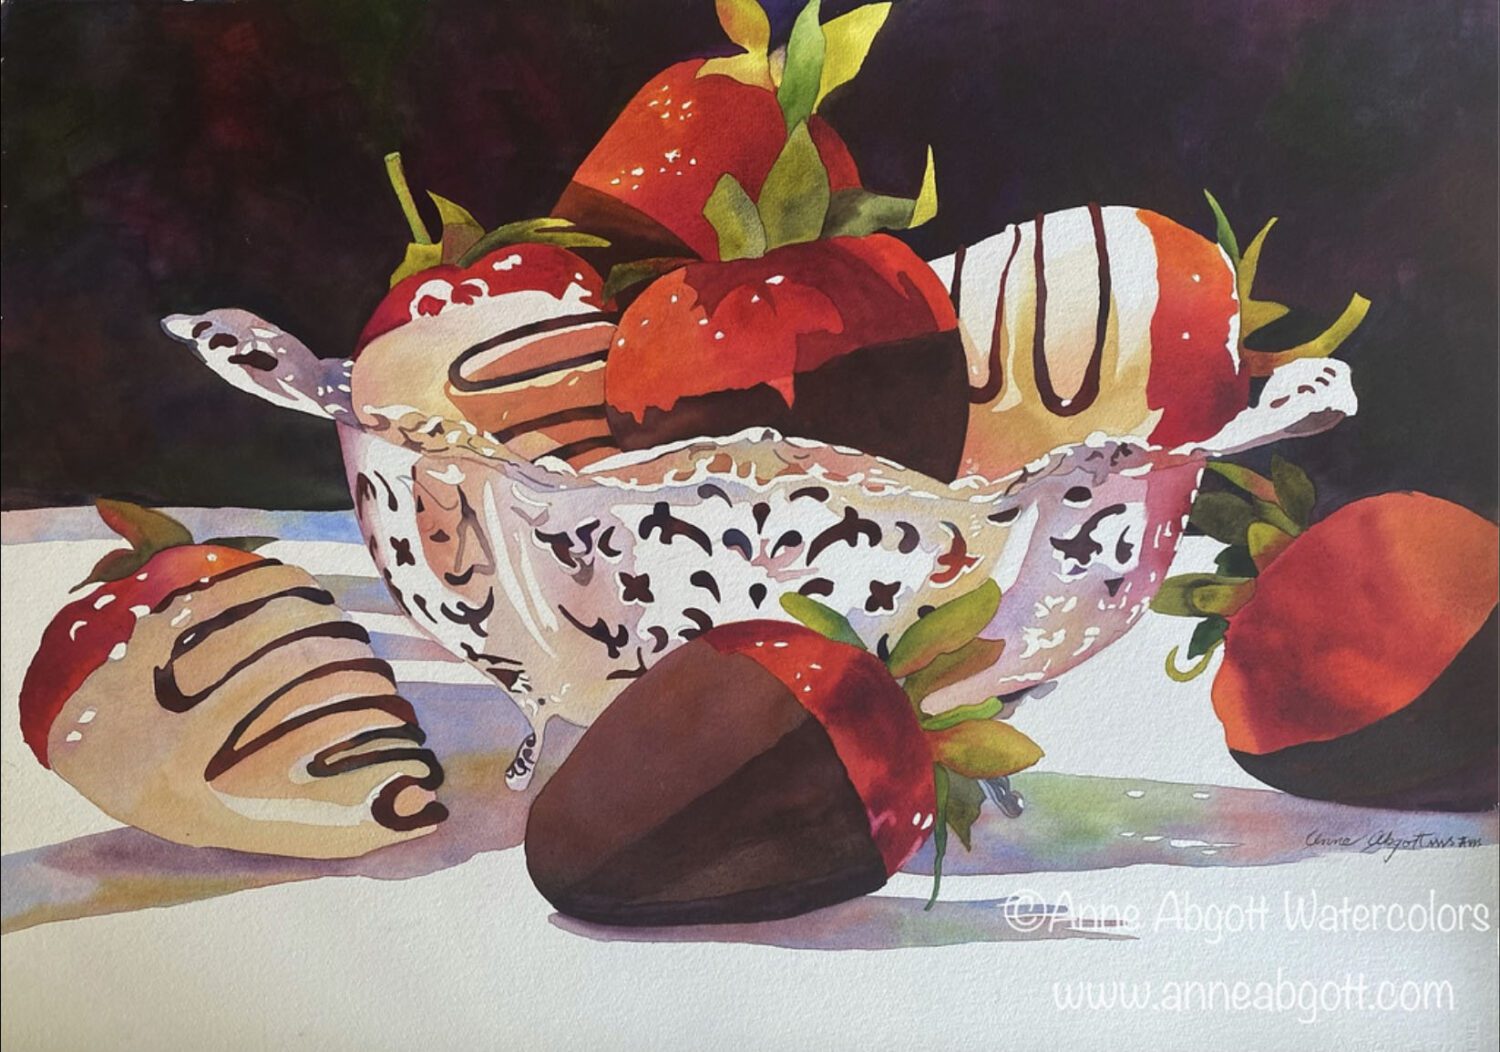 Artists’ Guild features mouth-watering art